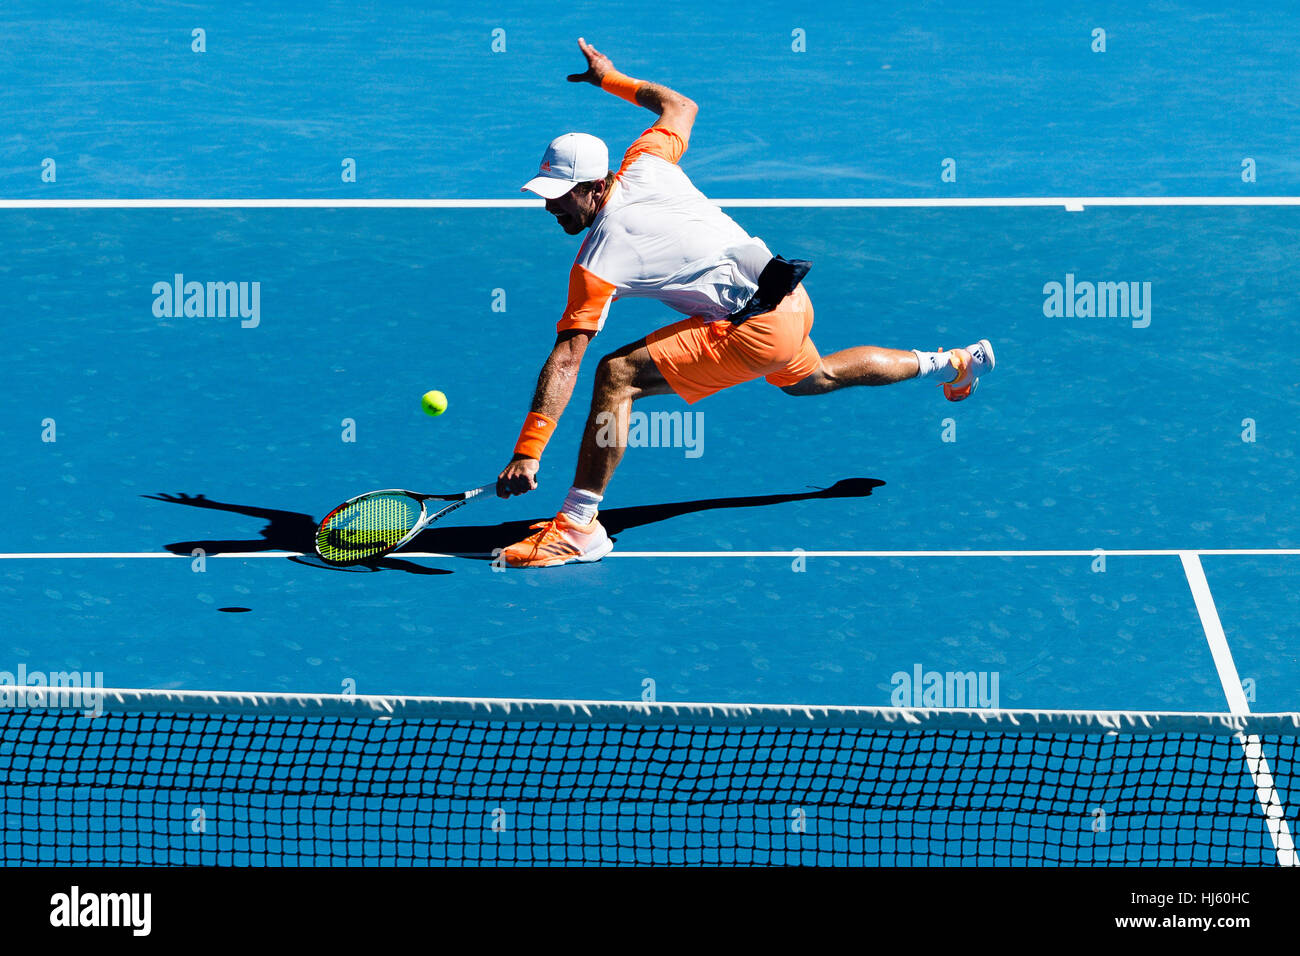 Mischa Zverev of Germany ousts world number one Andy Murray during the 2017 Tennis Australian Open at Melbourne Park Stock Photo